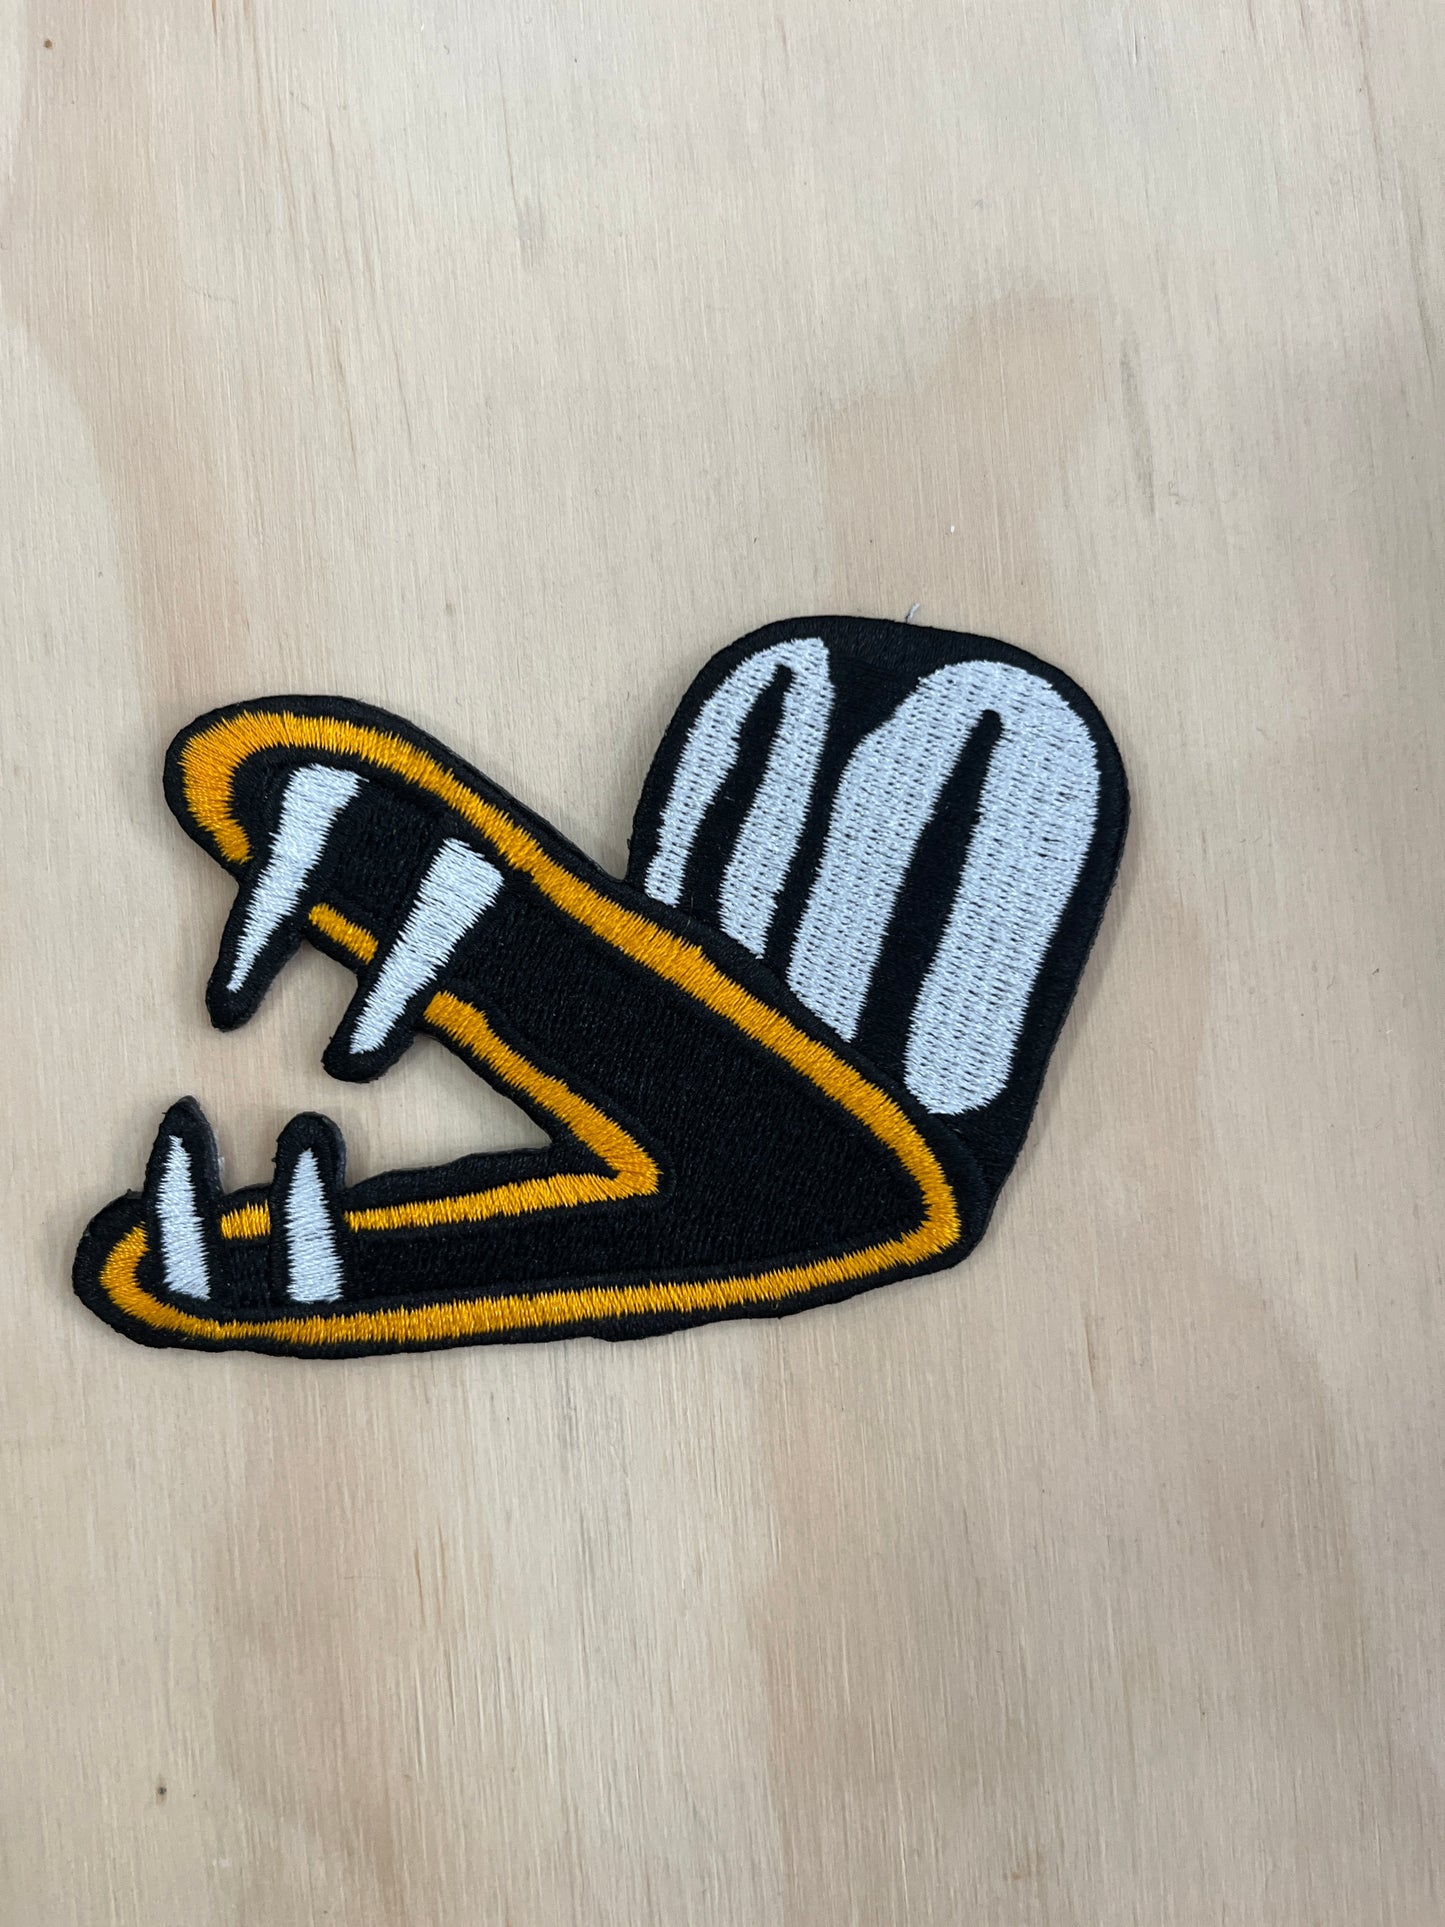 Embroidered Patch - Mille Putois